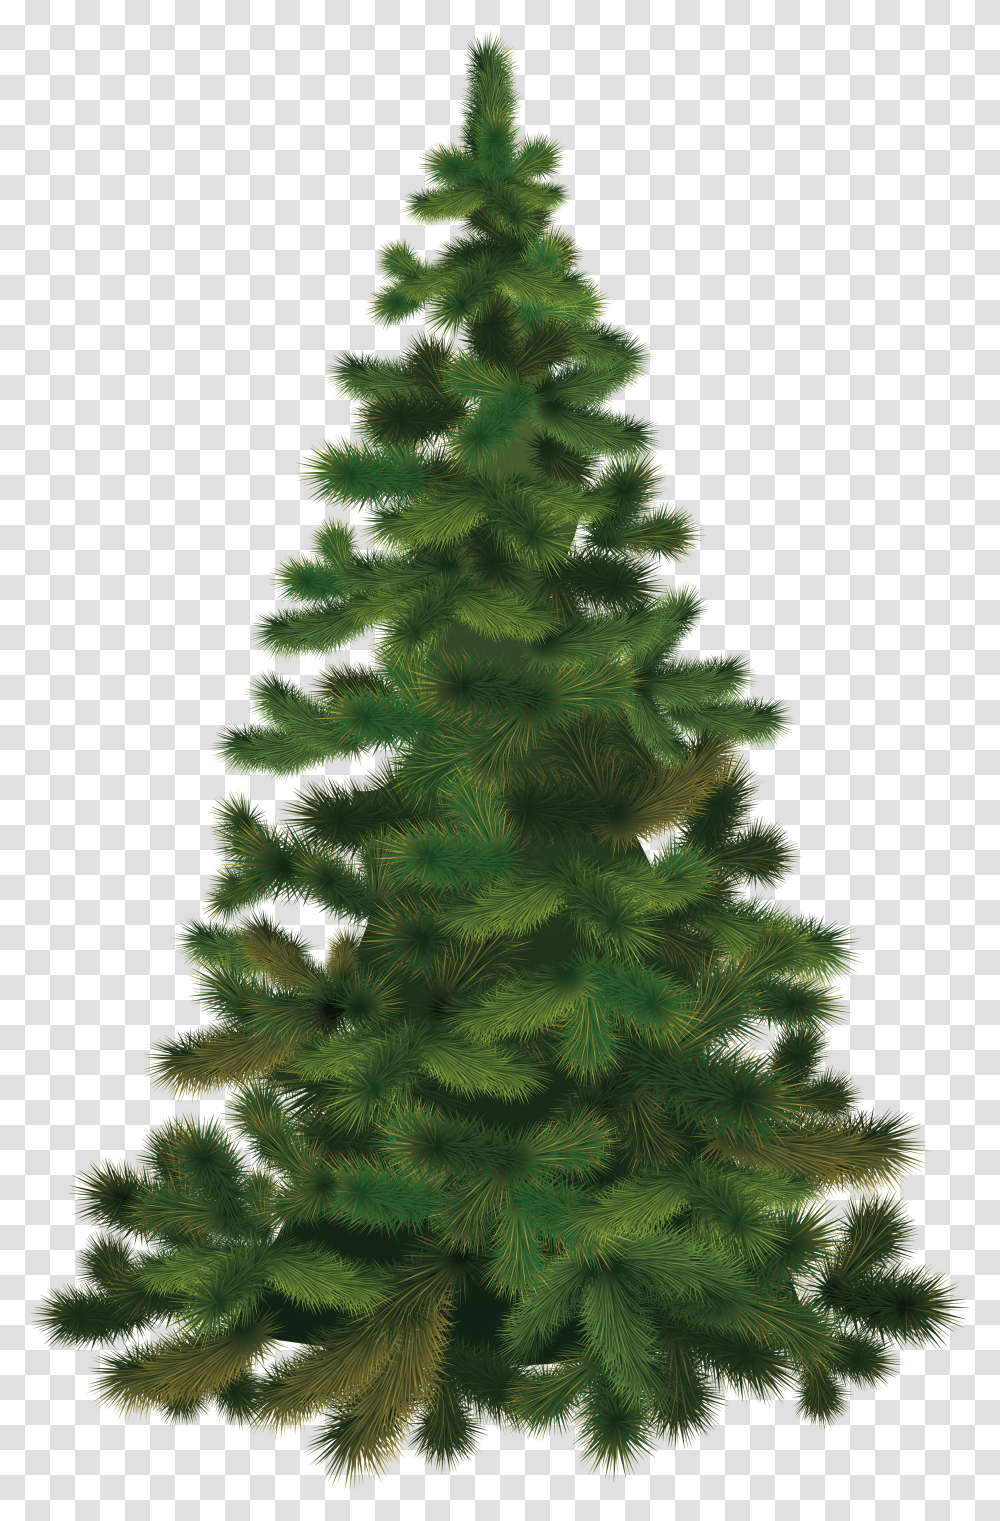 Pine Tree Evergreen Clip Art Background Transparent Png